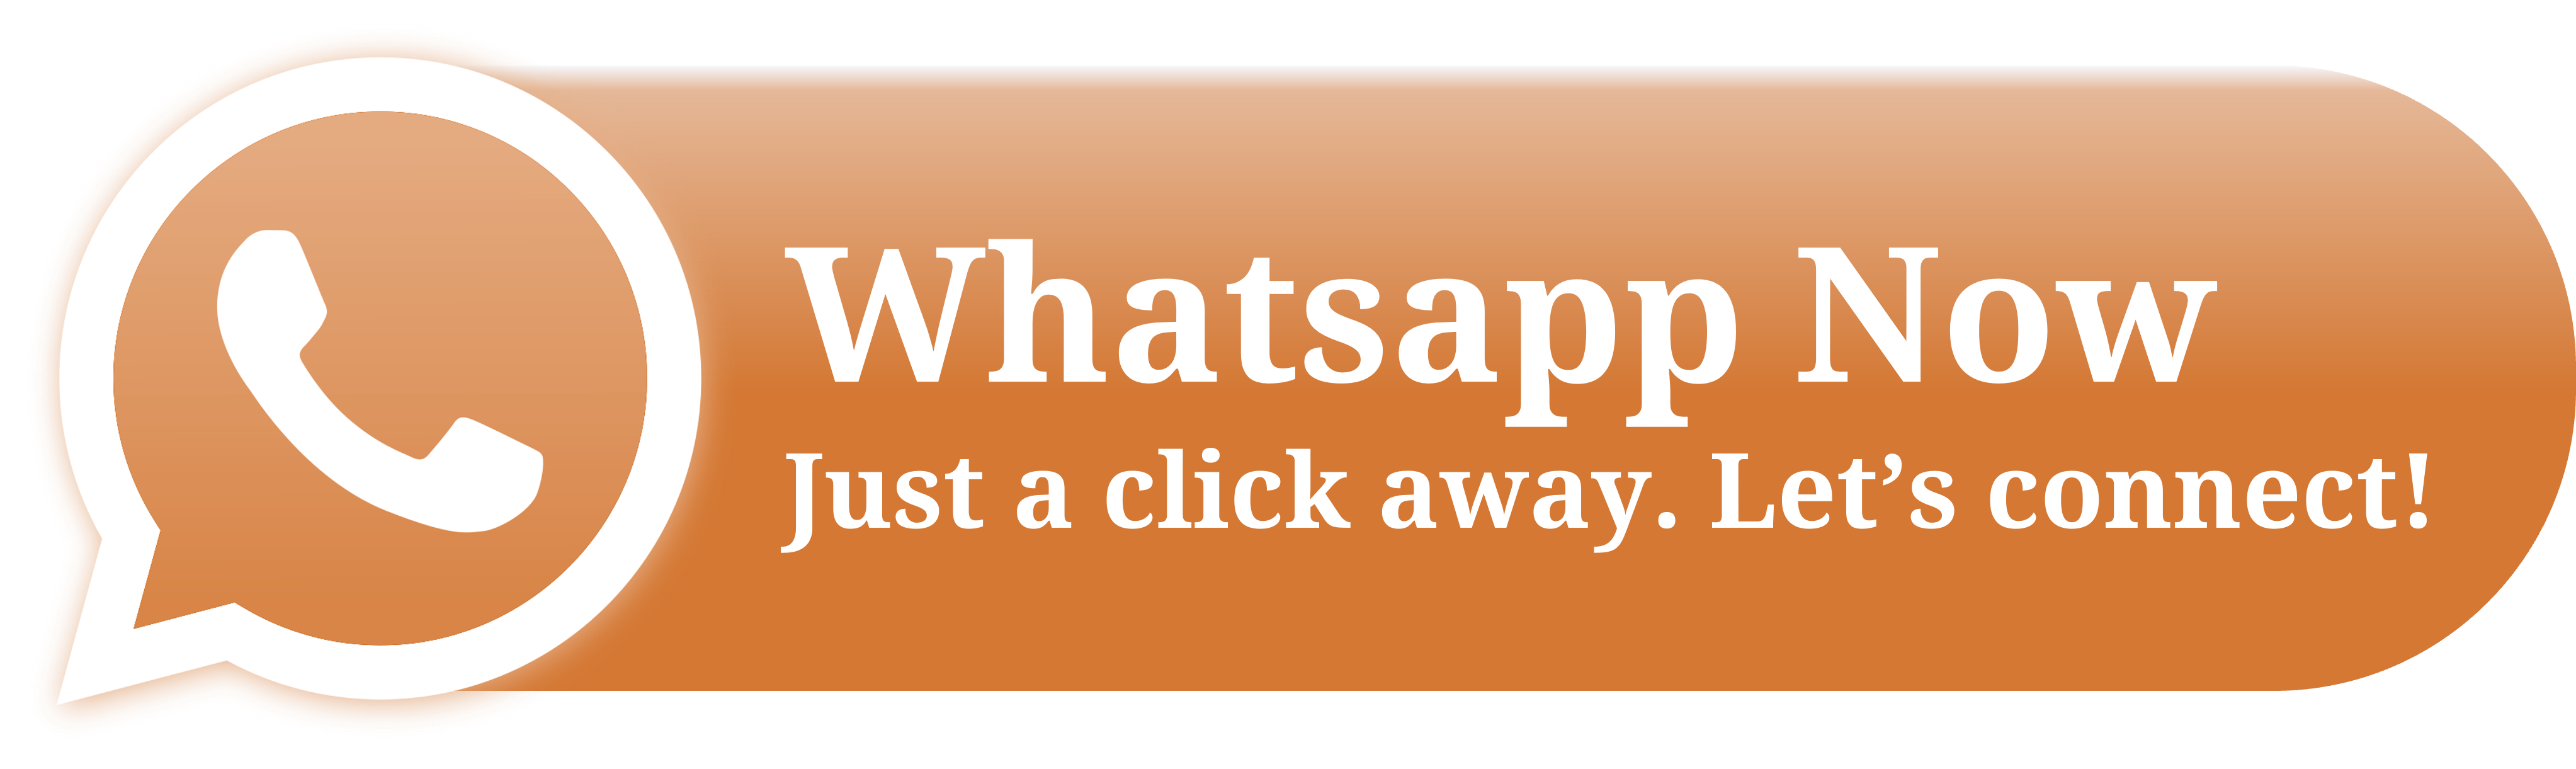 Lets connect WhatsApp Aikido Coevorden